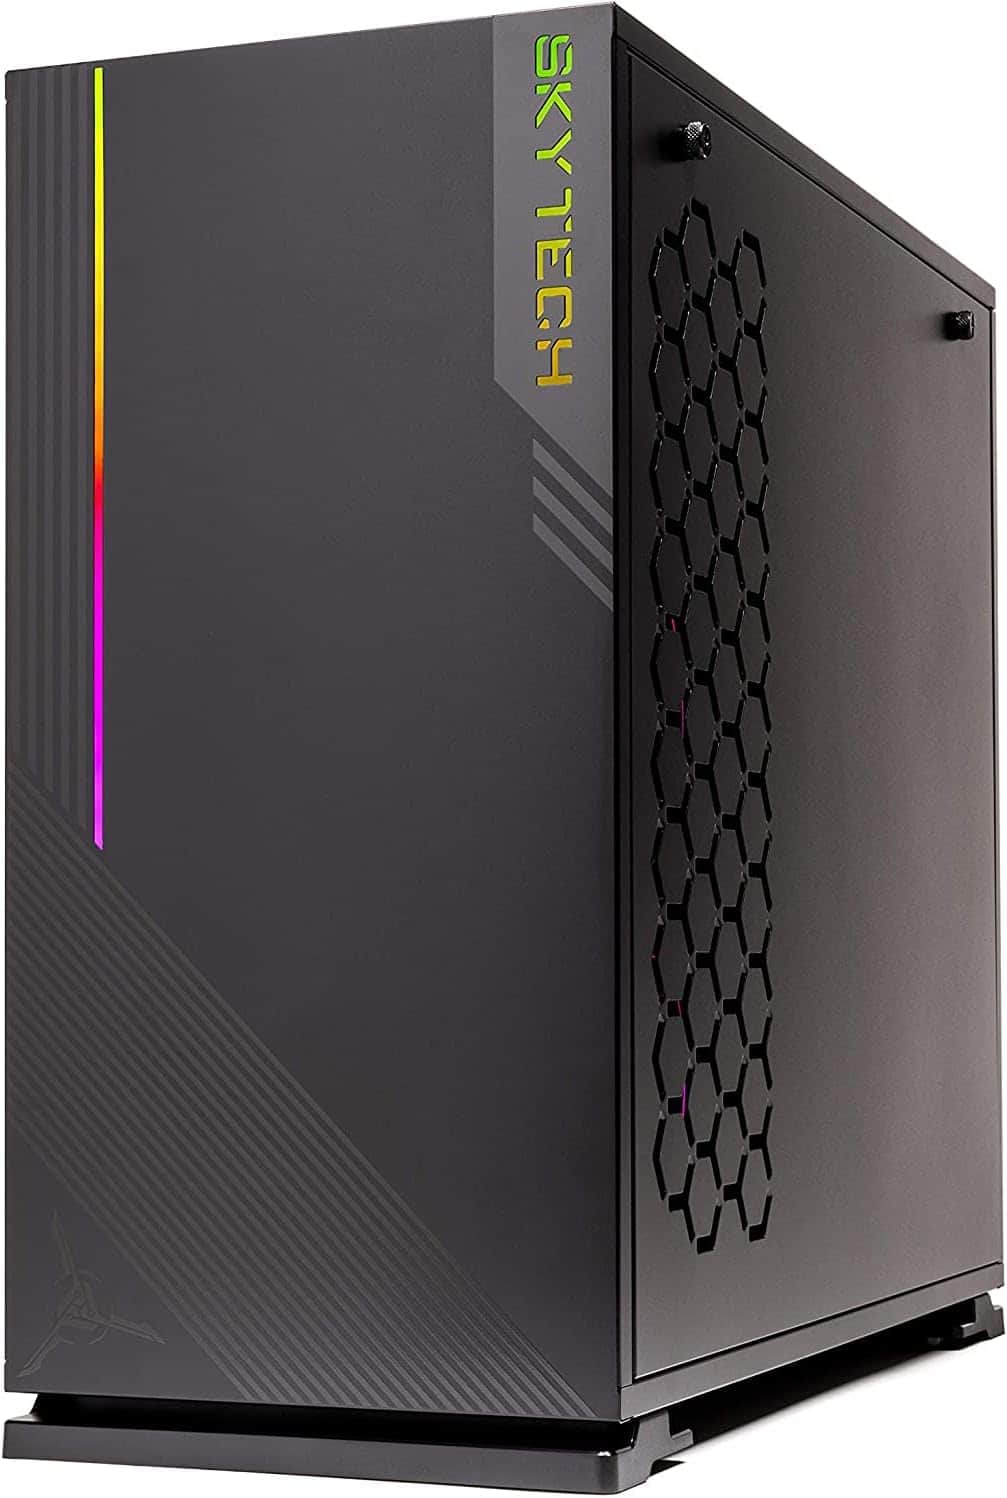 The Skytech Gaming Azure Gaming PC is a sleek and stylish black pc case with a vibrant rainbow colored side panel.